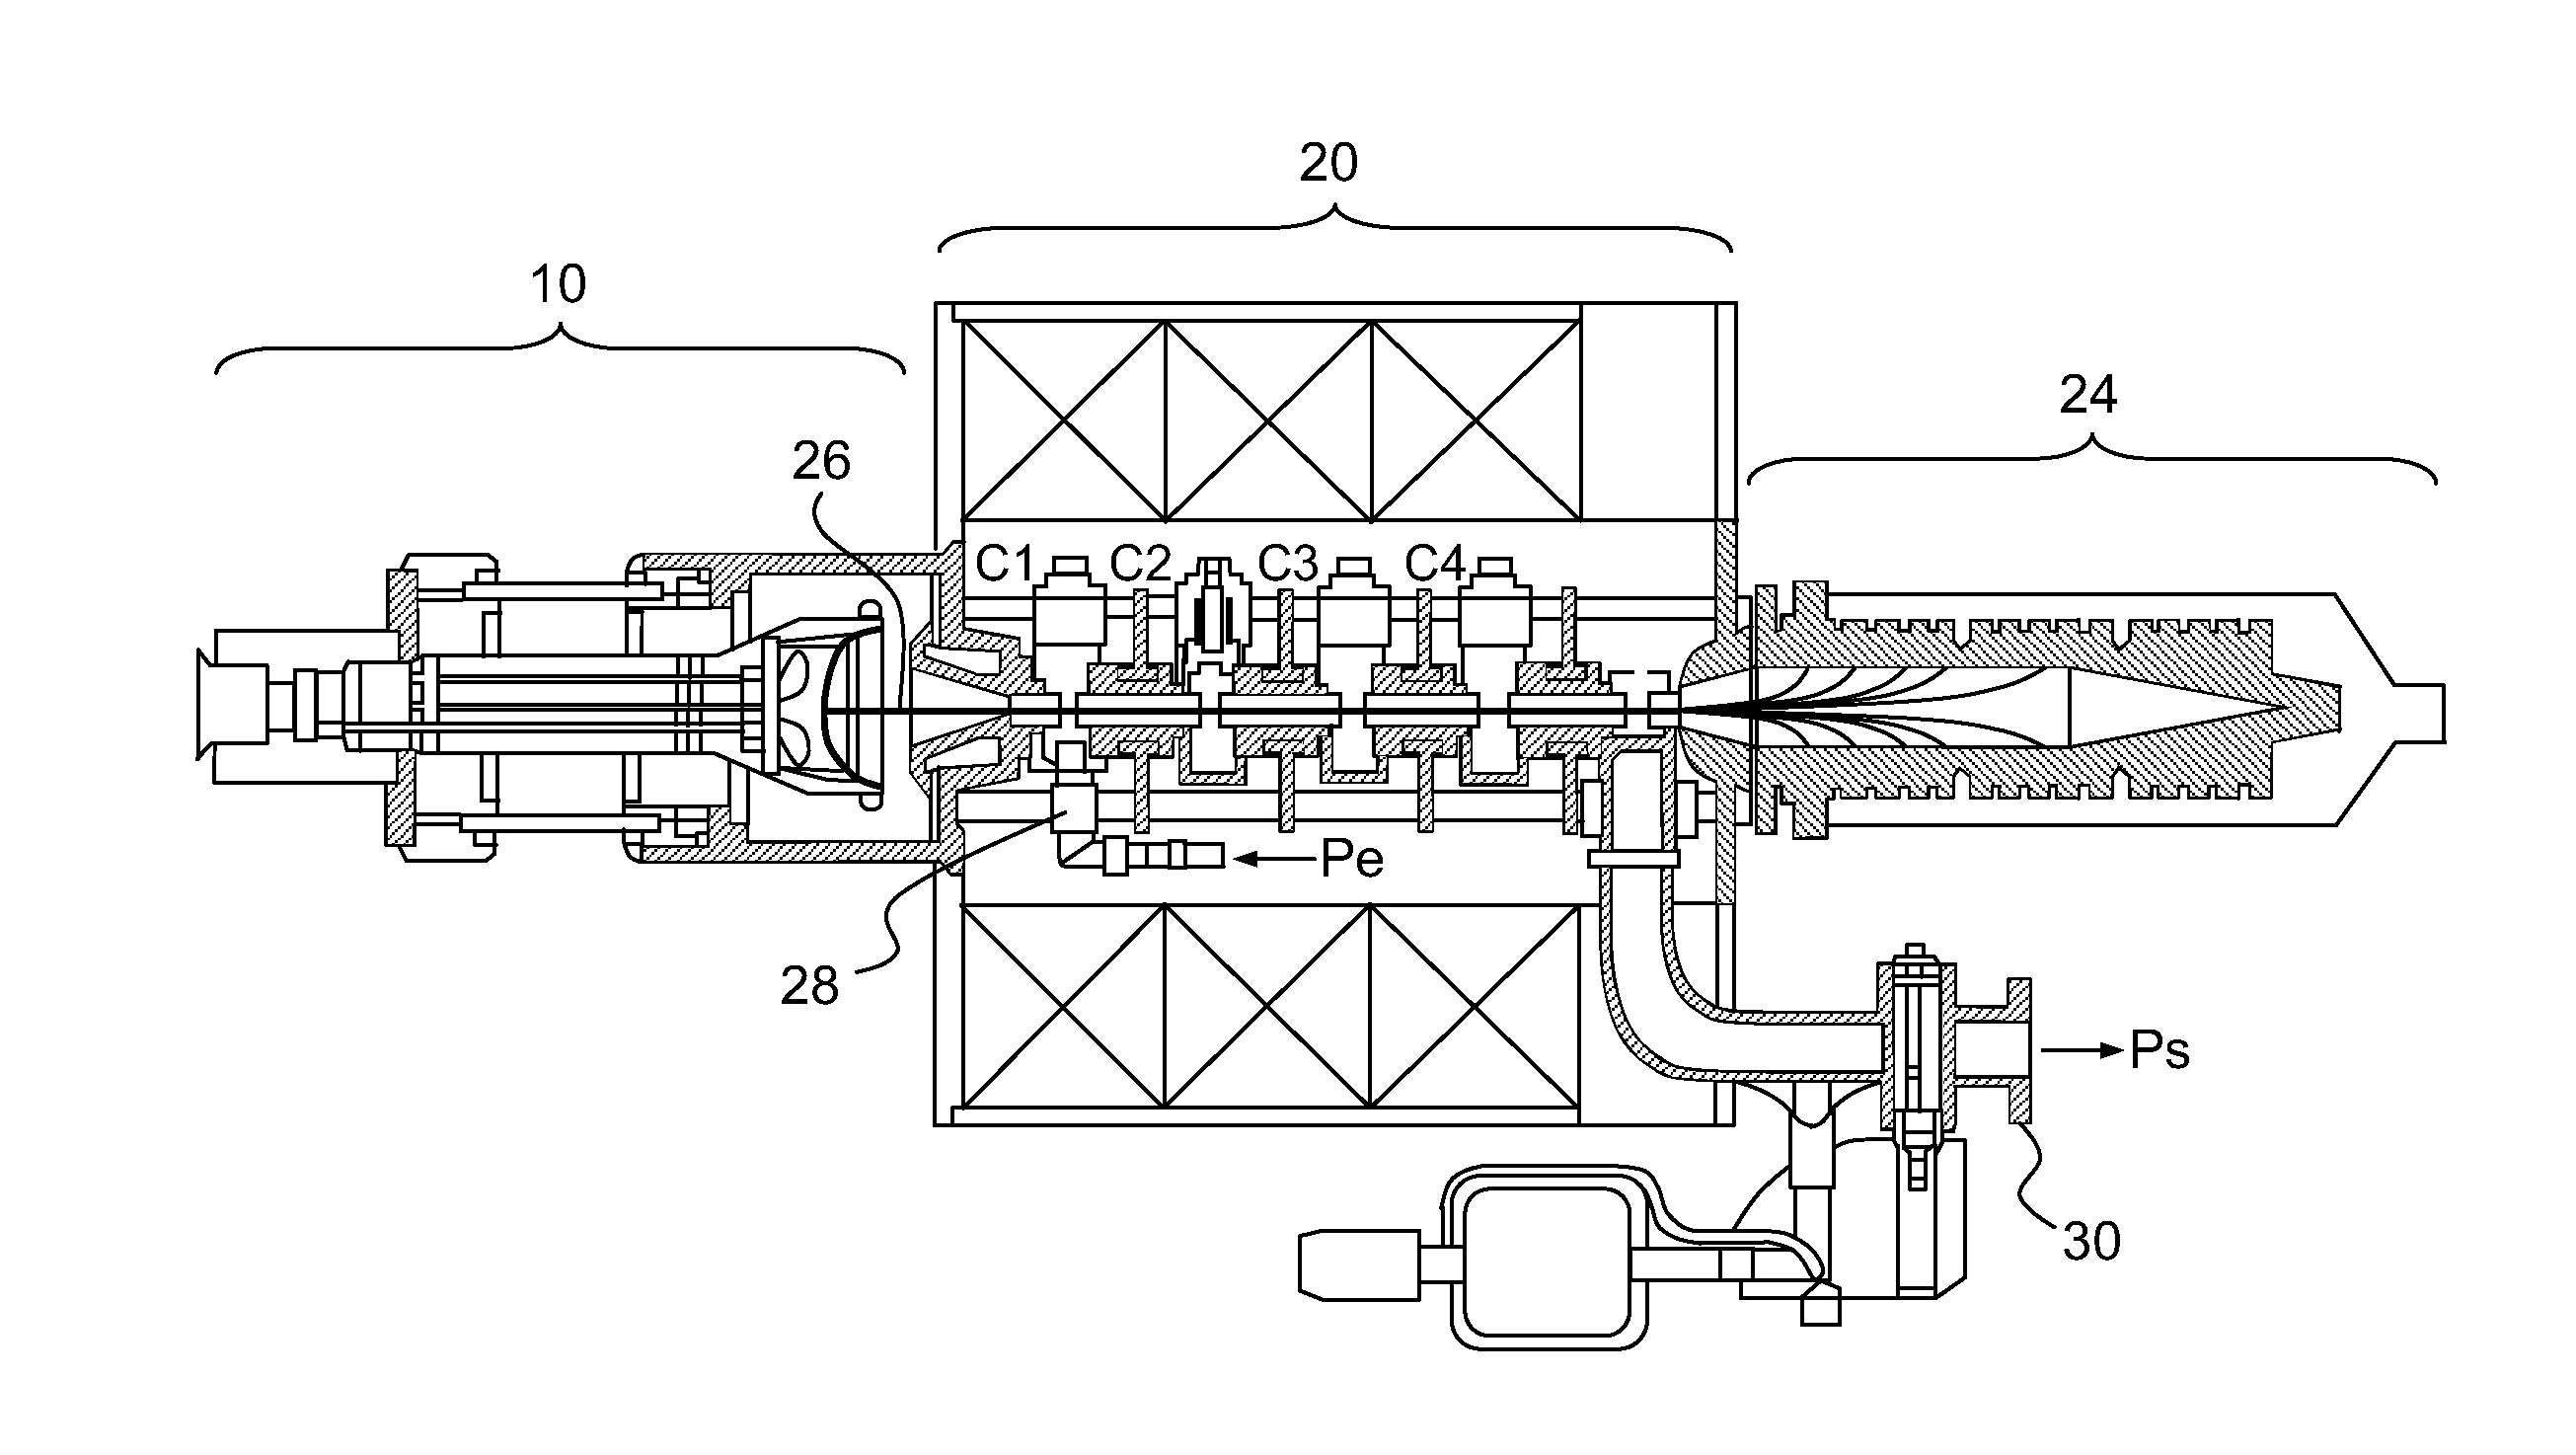 Electron tube with optimized injection of the electron beam into the tube